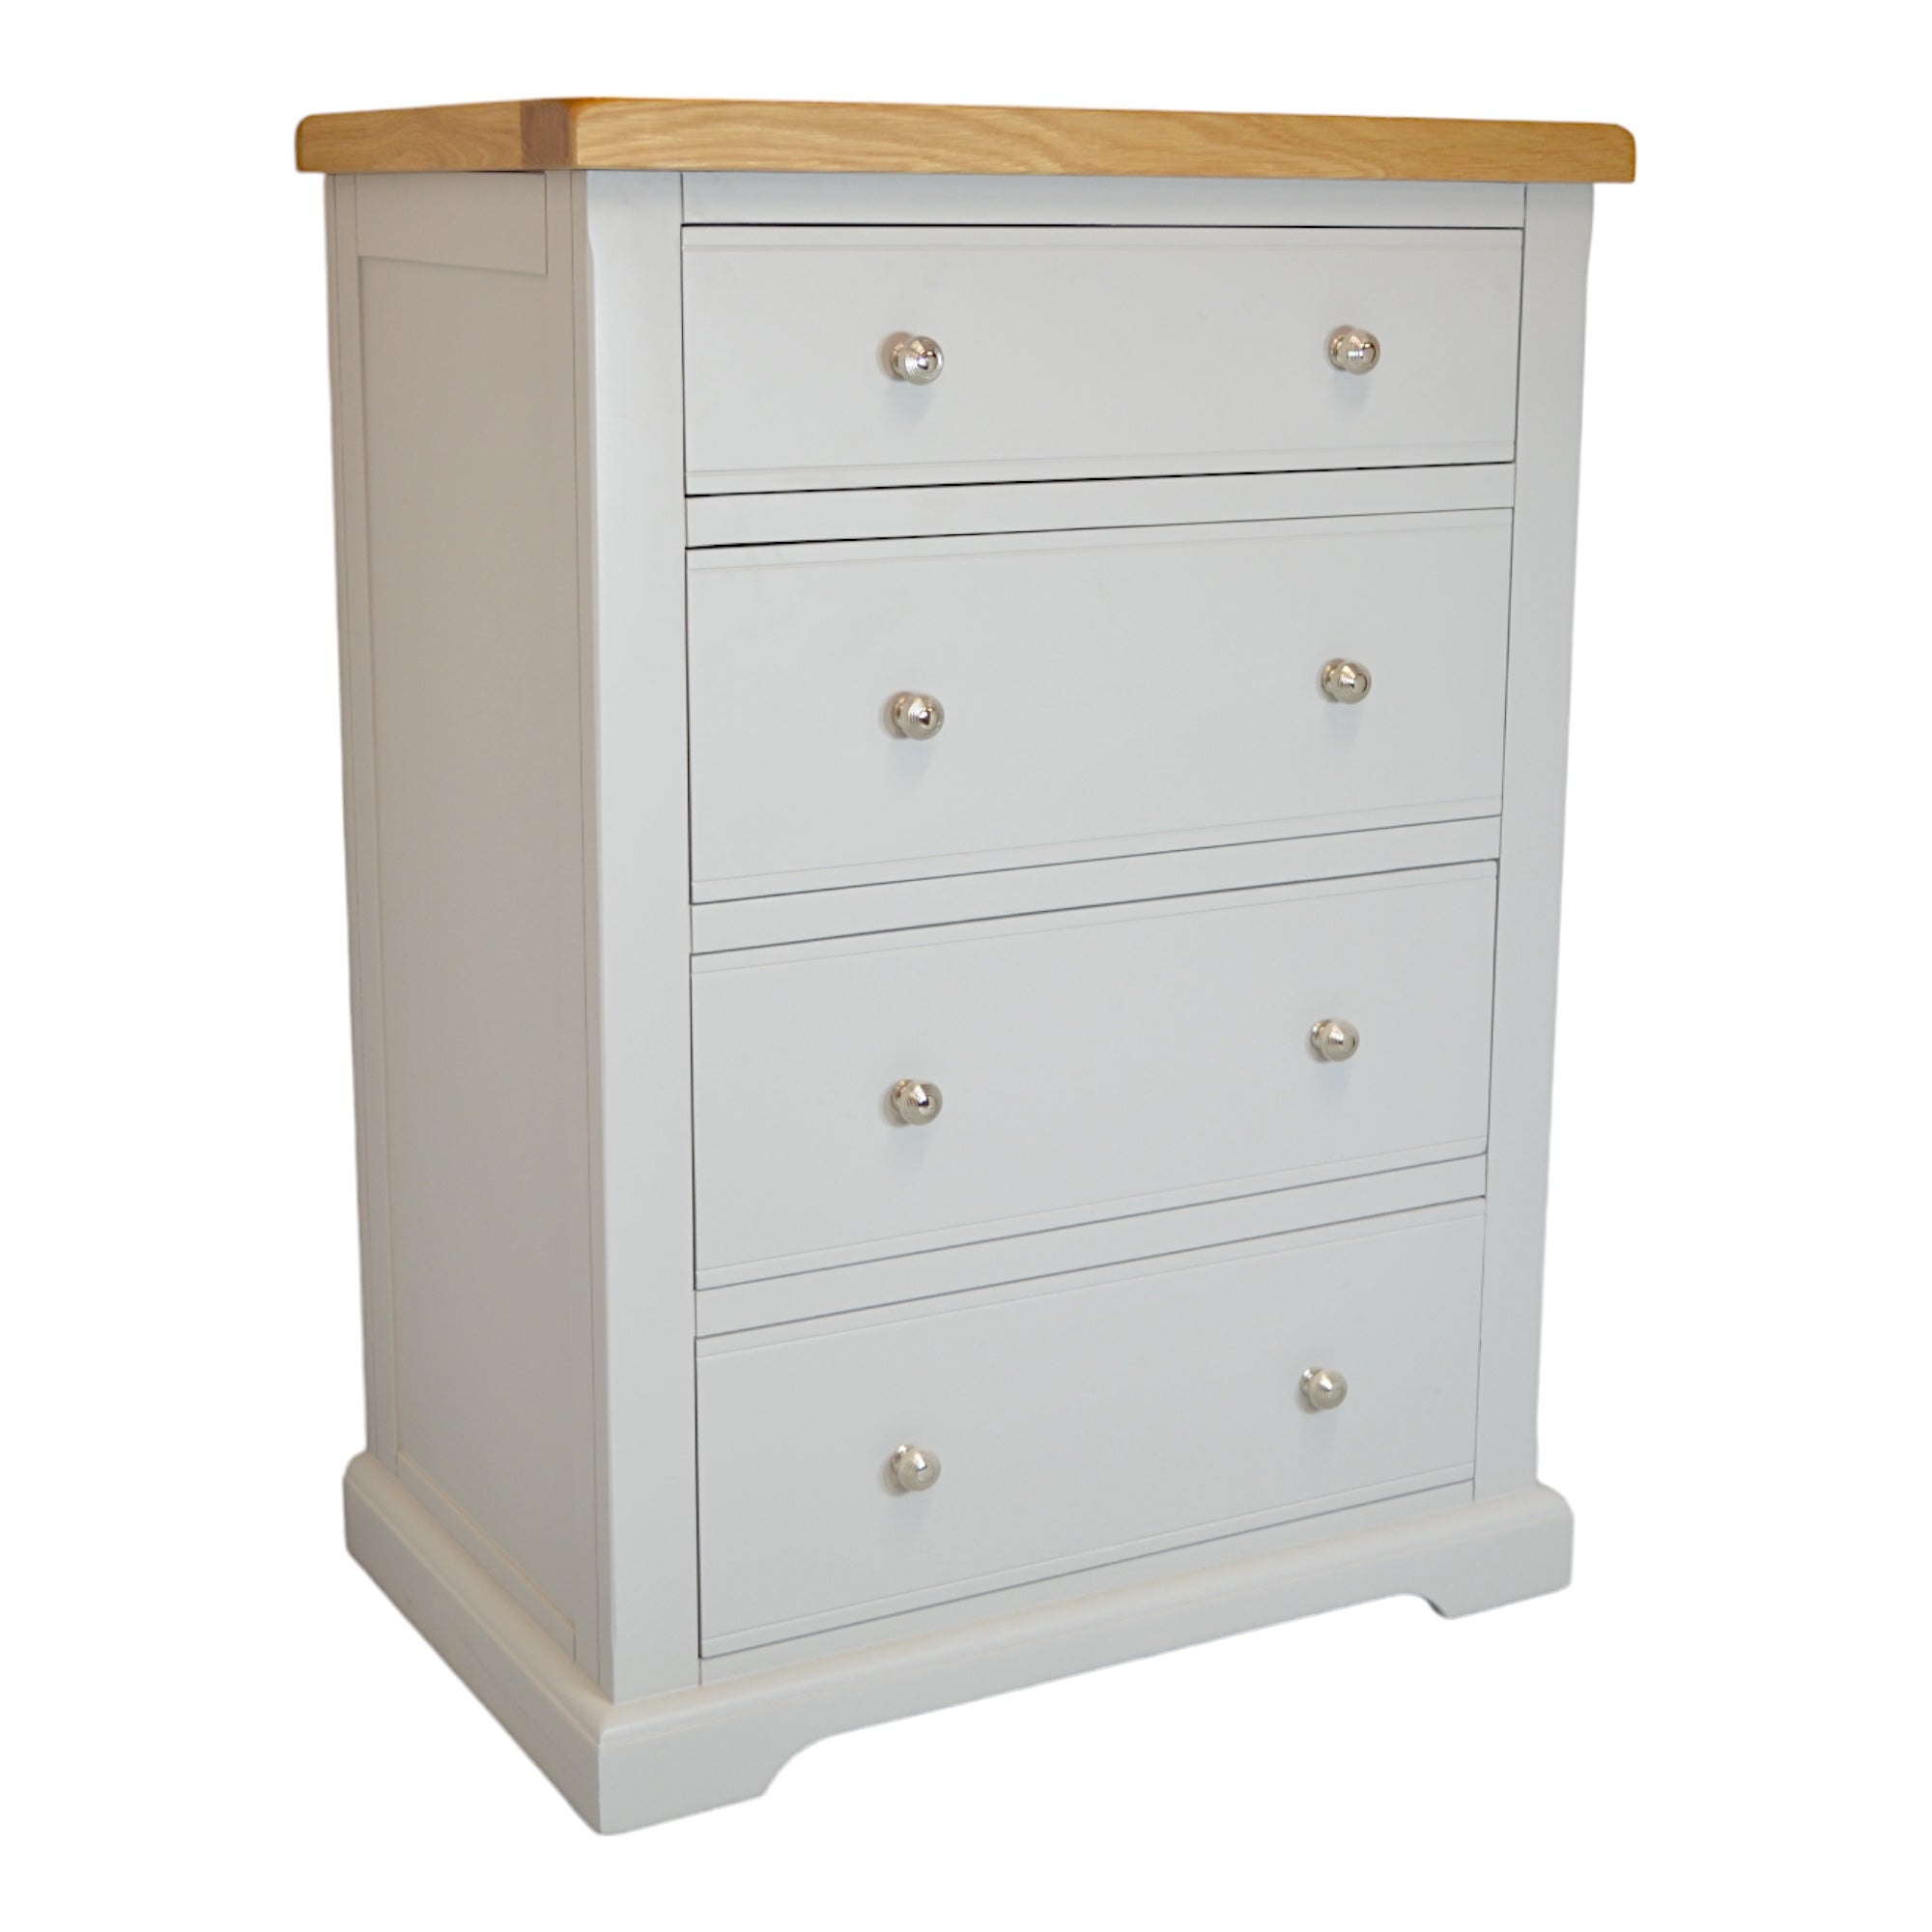 GROFurniture Rio Grey Deep Chest of Drawers